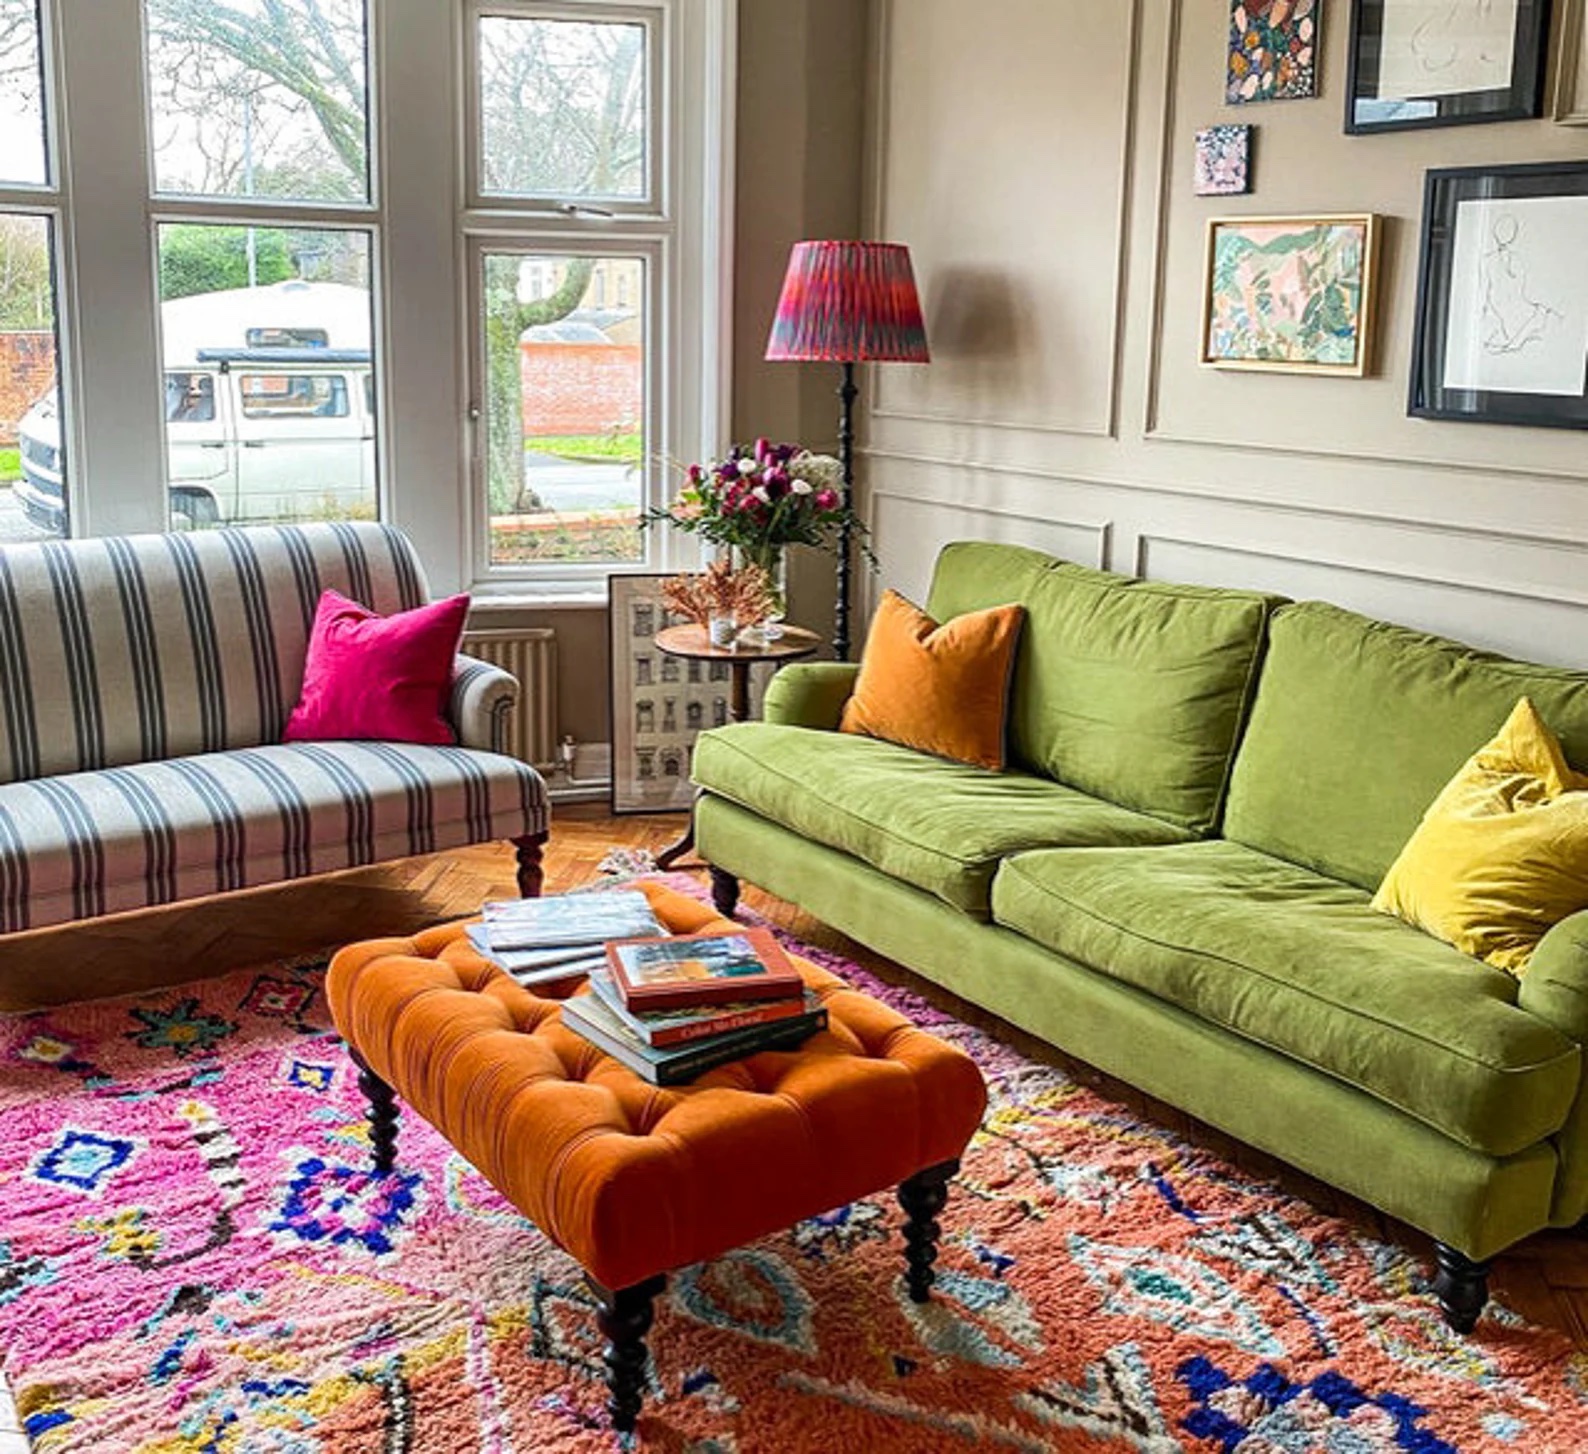 What Color Rug Goes With a Green Couch?